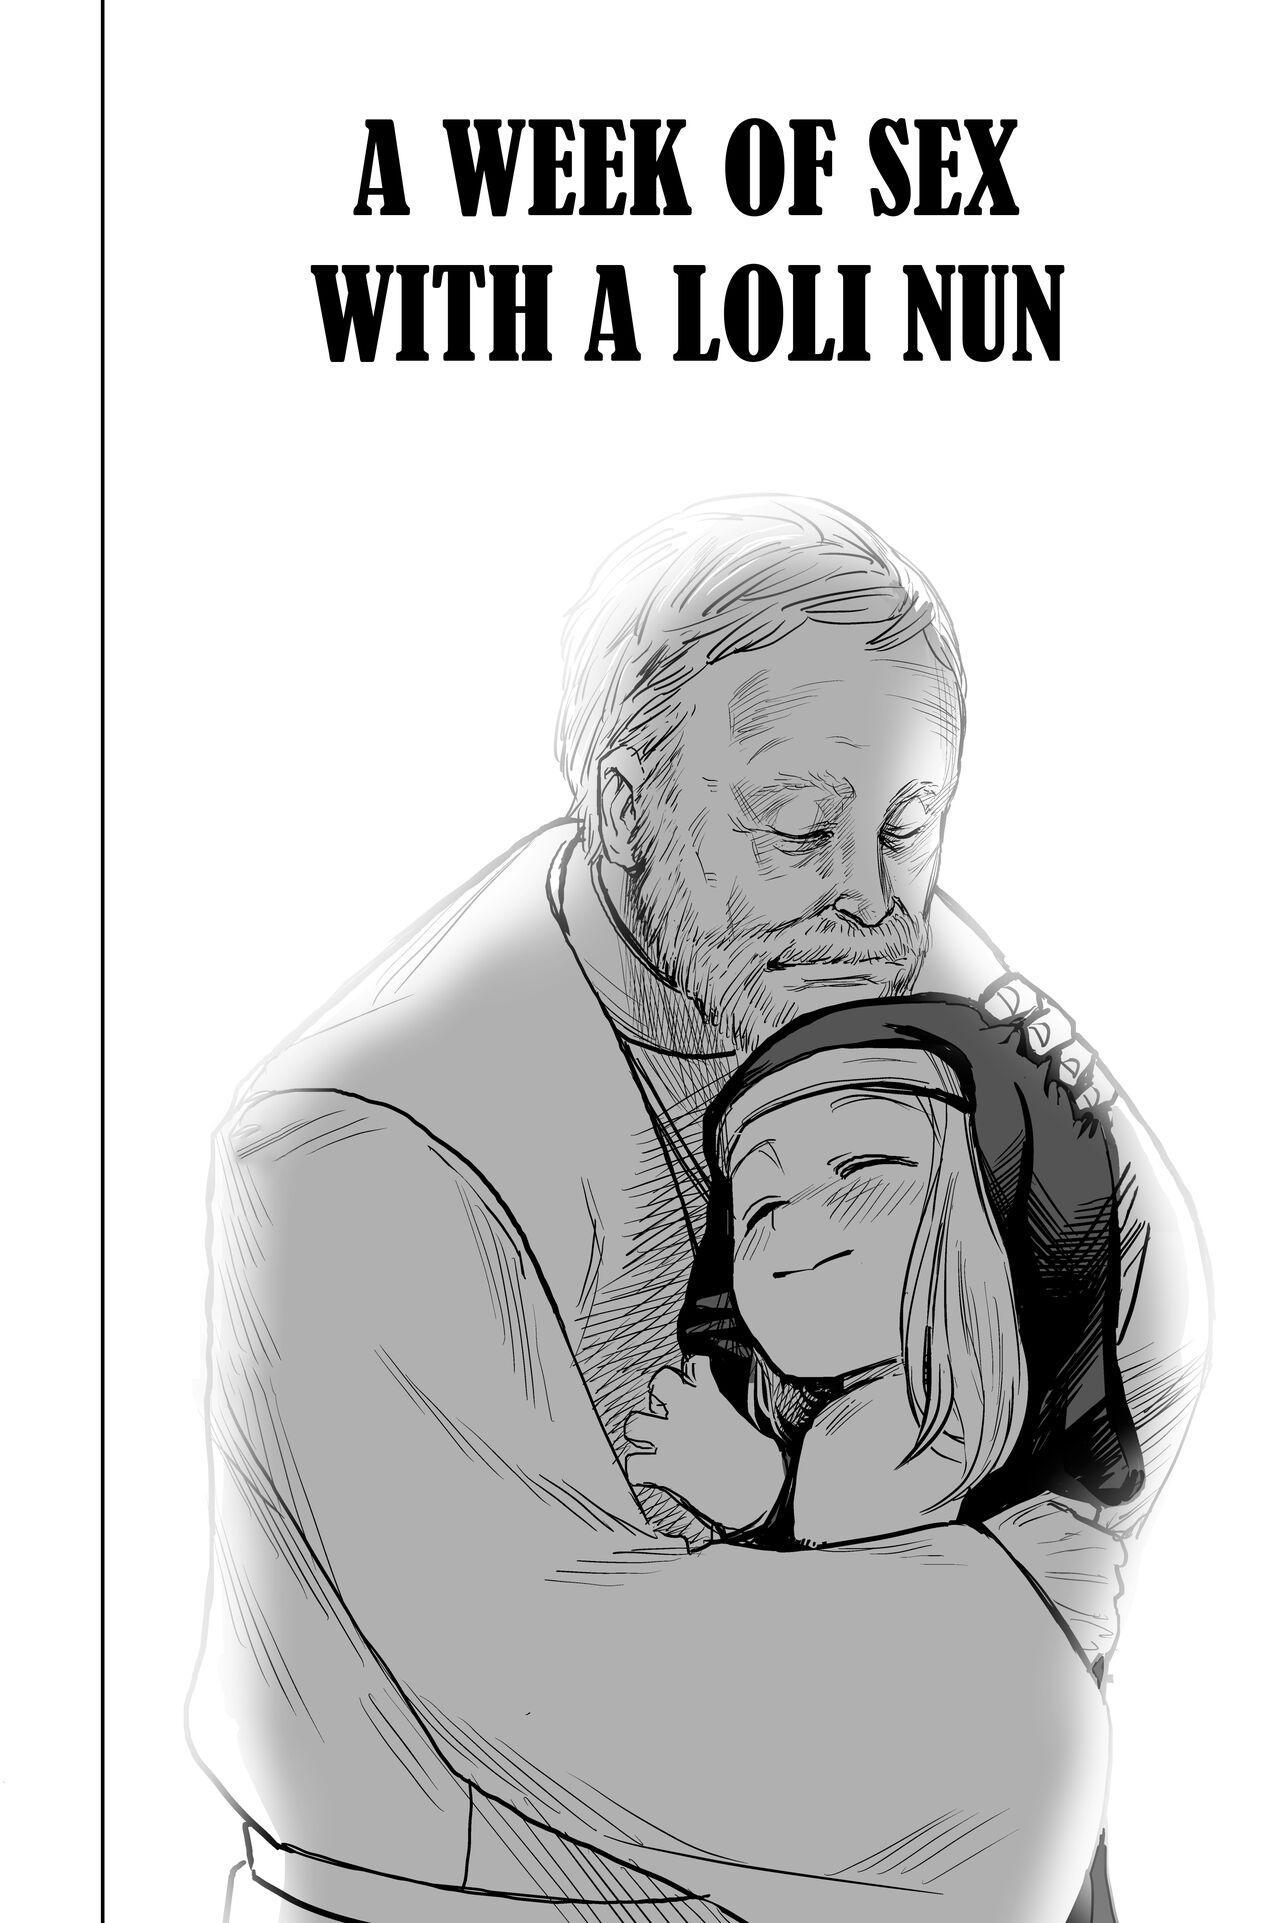 Stroking Loli Sister to Sex suru Isshuukan | A Week of Sex With a Loli Nun Reversecowgirl - Page 7